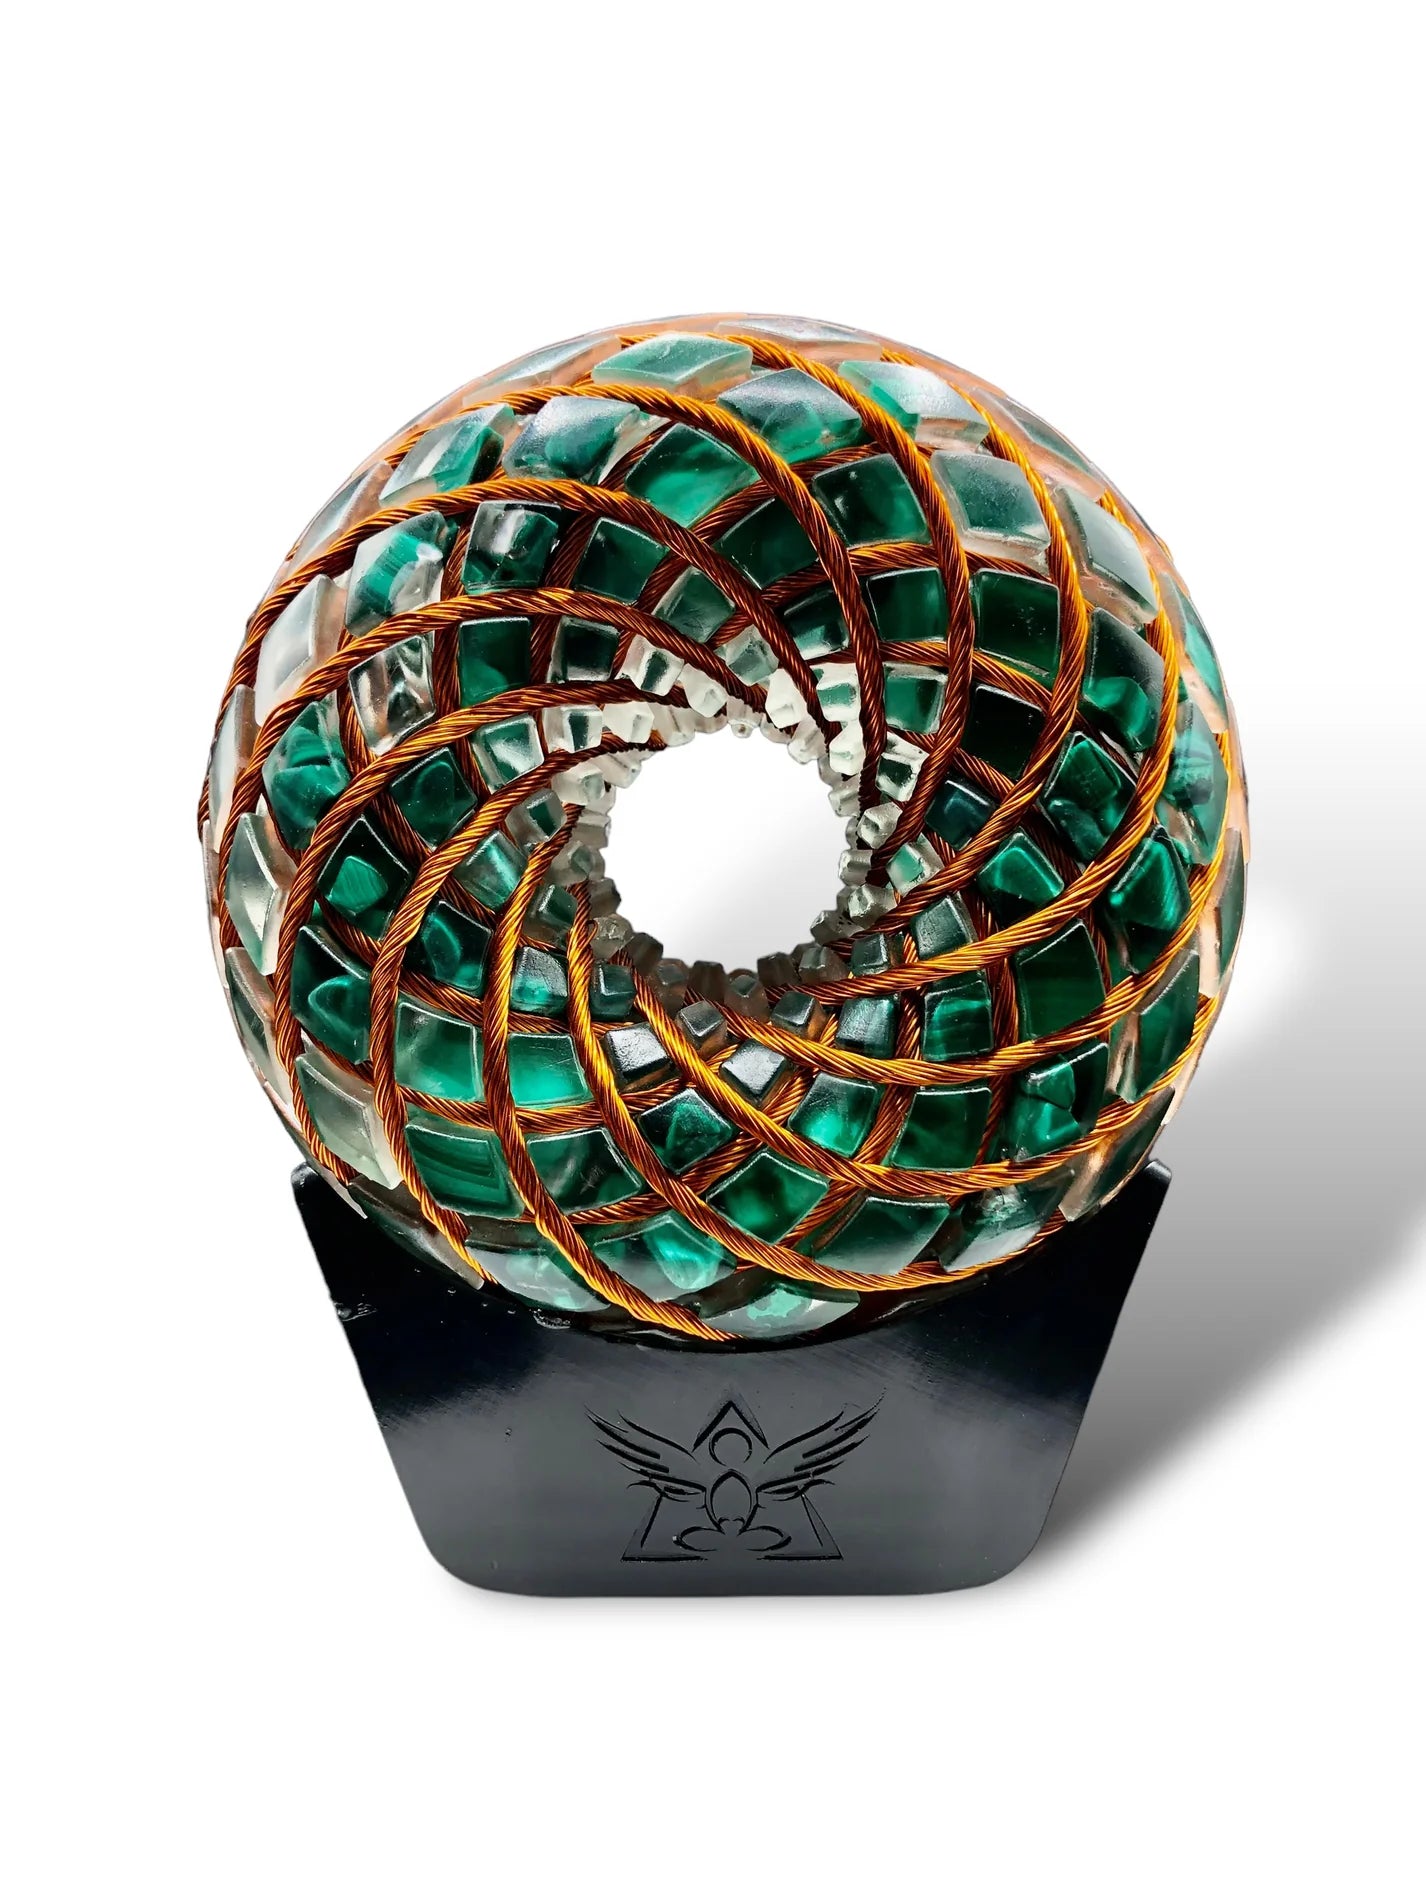 The Heart Stone: Delving into the Mysteries of Malachite